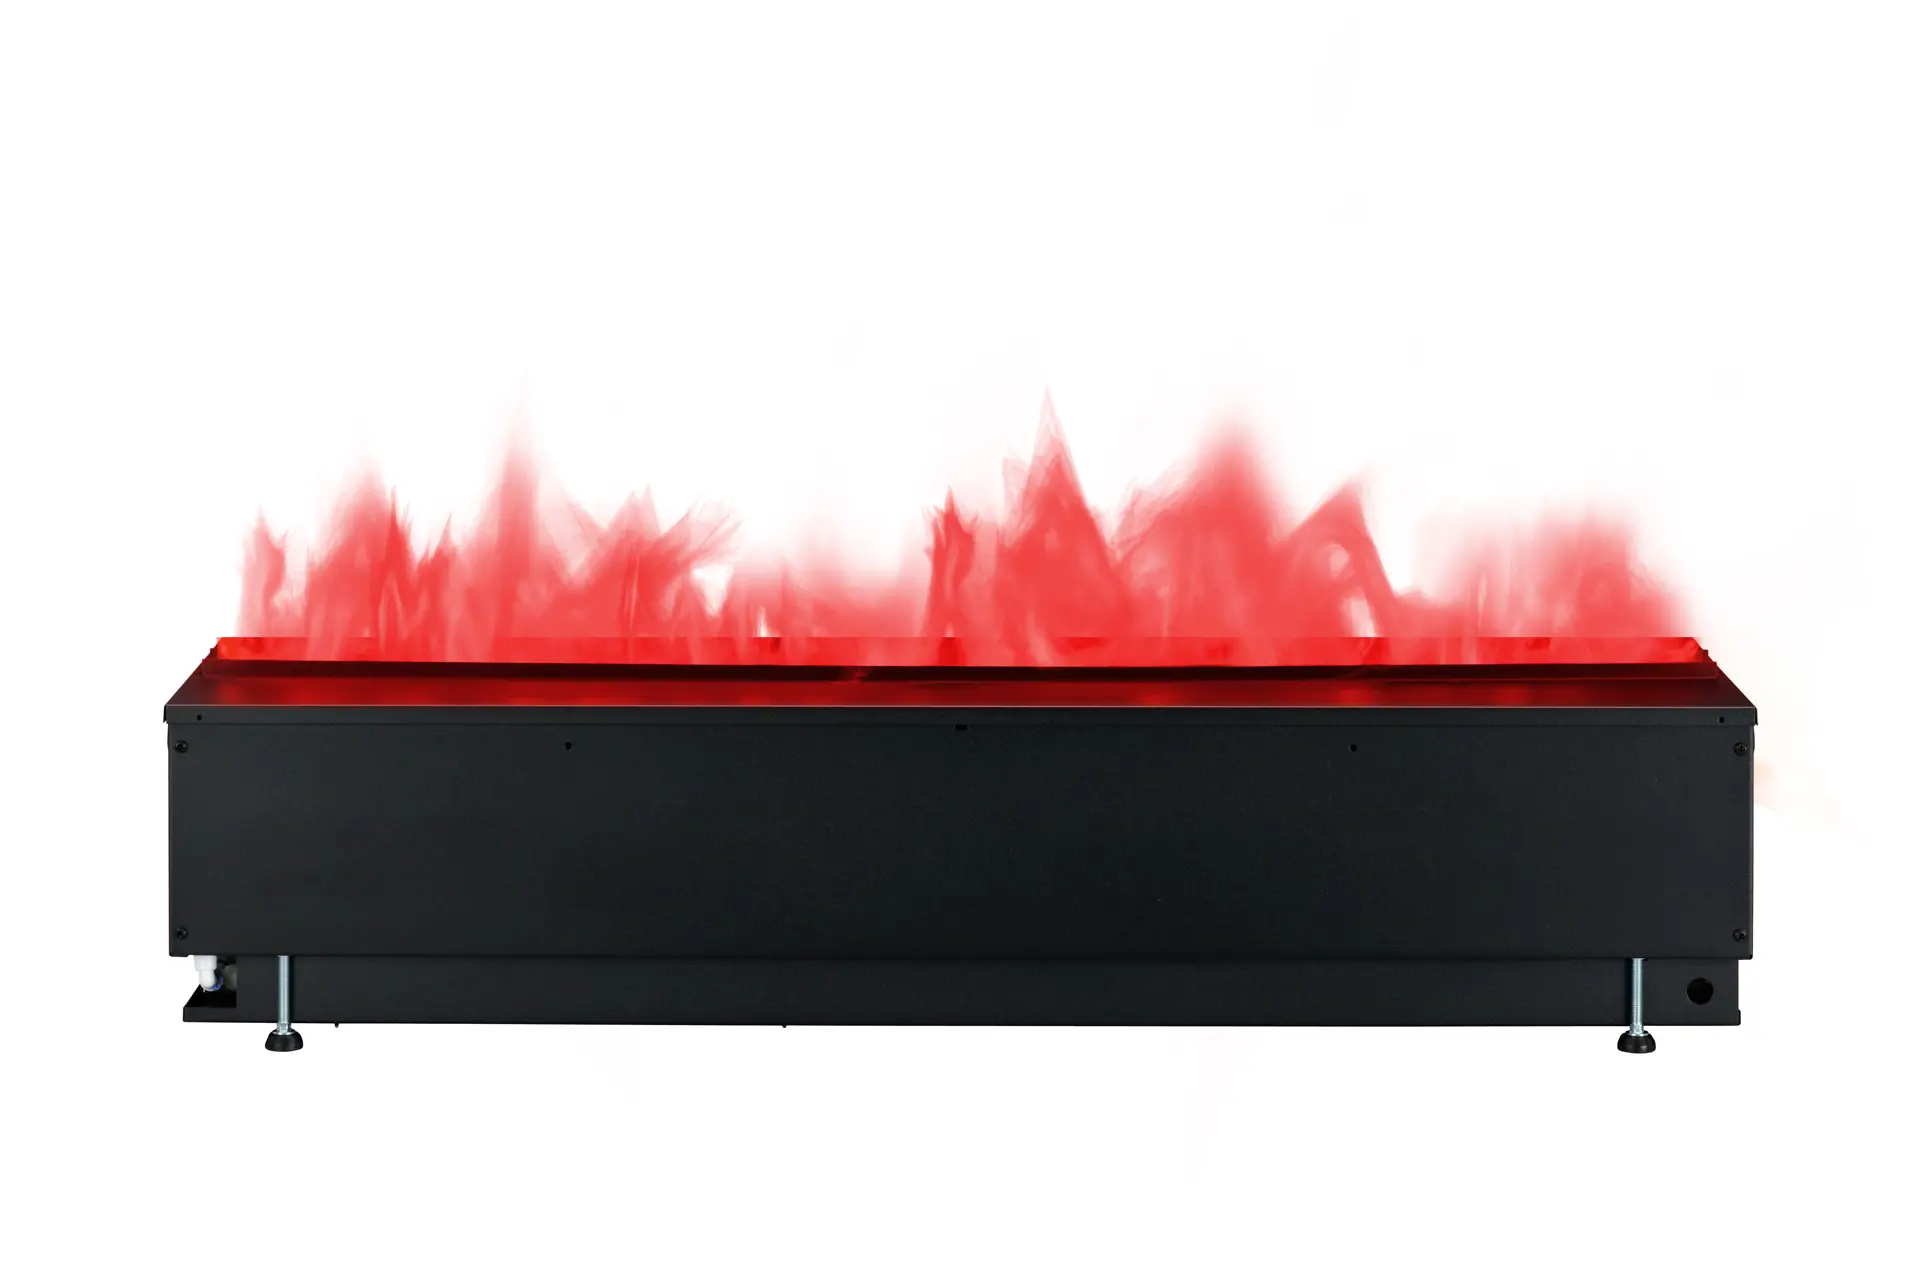 Dimplex_Cassette 1000 projects_400001275_Front Red Flame.jpg